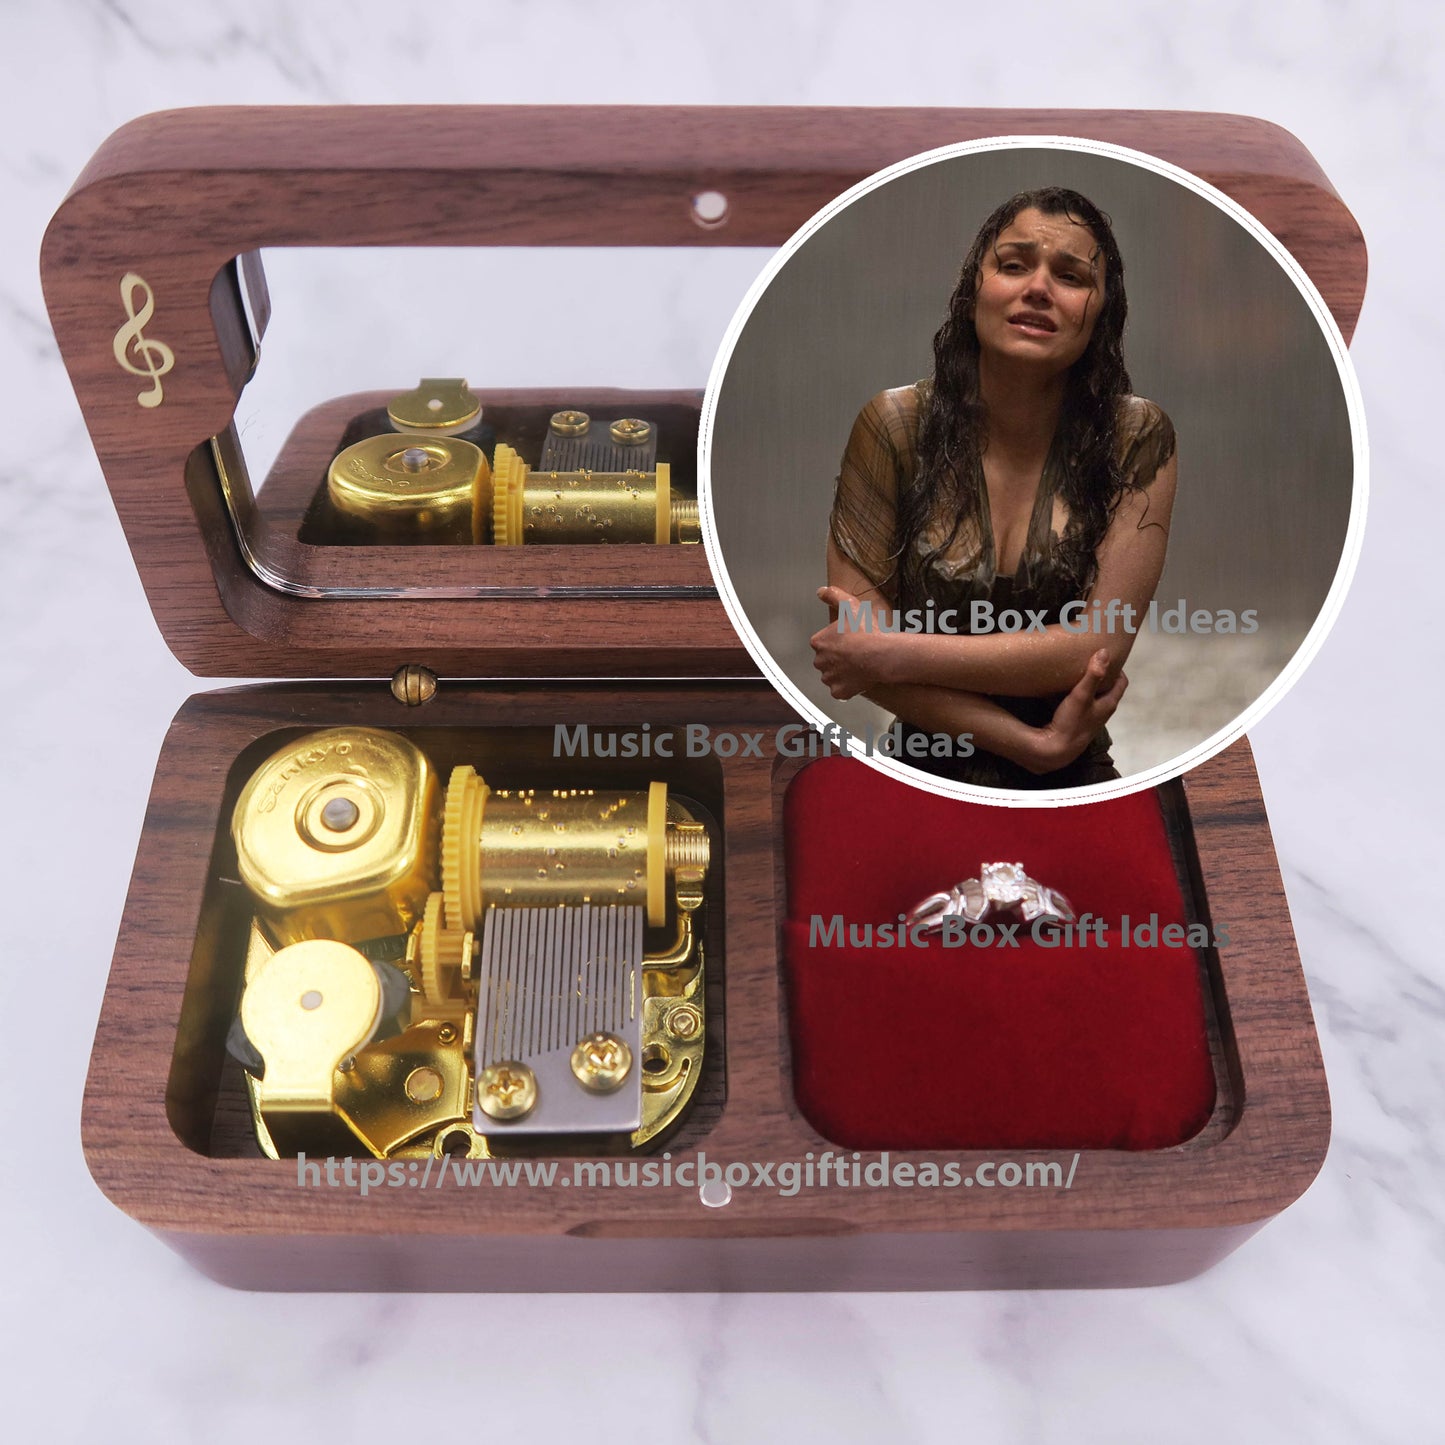 Personalized Les Misérables Soundtrack On My Own Éponine 18-Note Jewelry Music Box Gift (Wooden Clockwork) - Music Box Gift Ideas